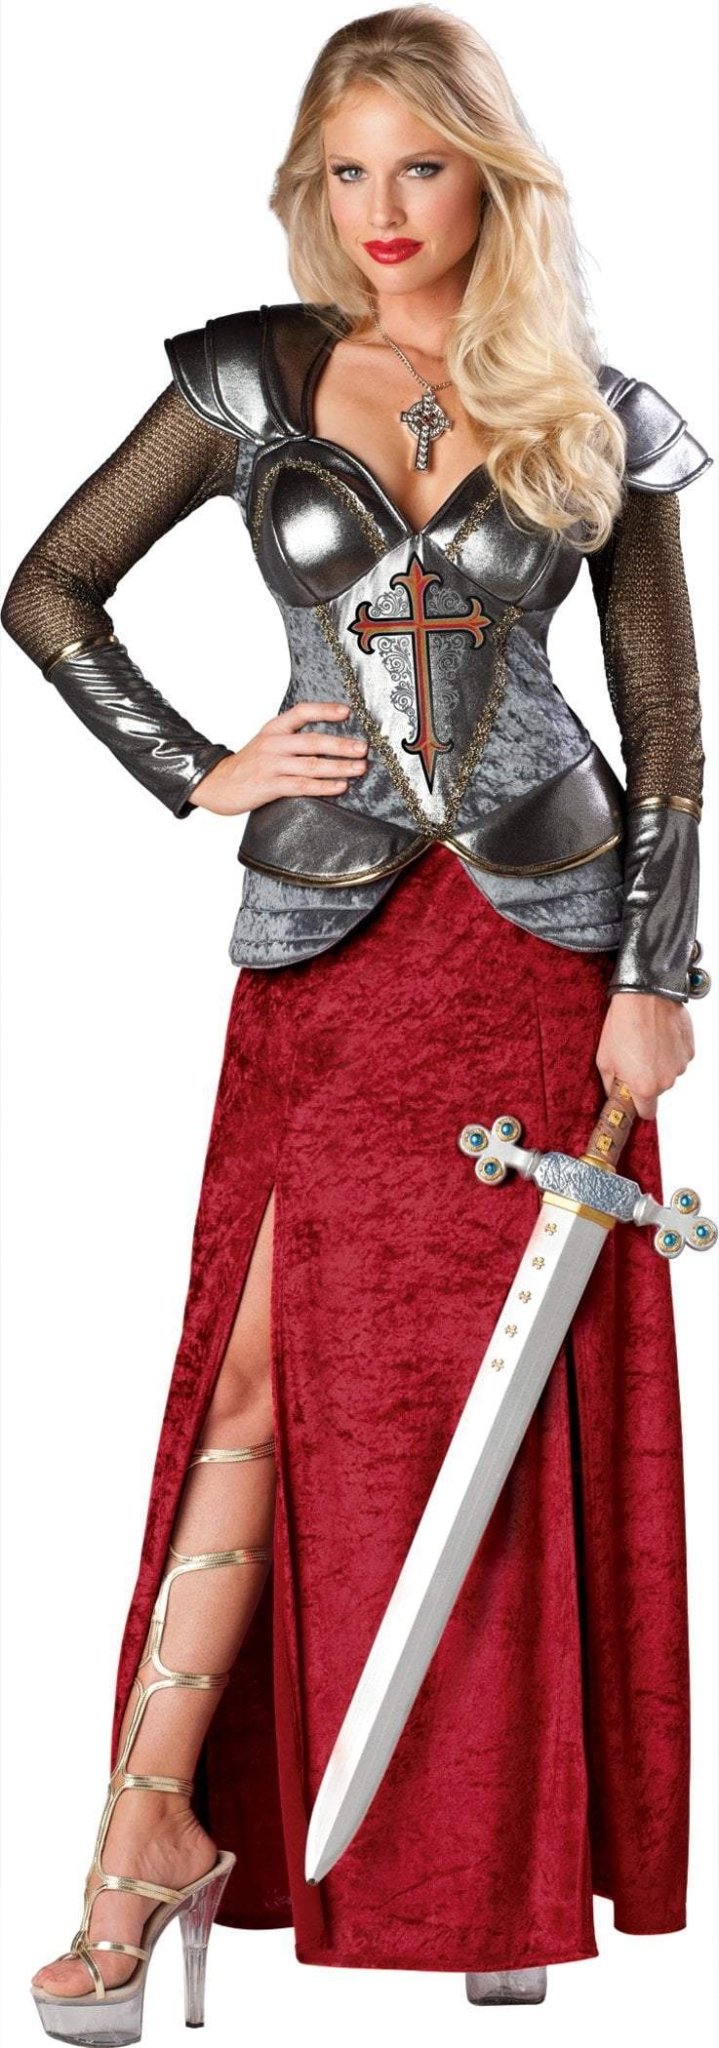 Joan of Arc Deluxe Costume - JJ's Party House